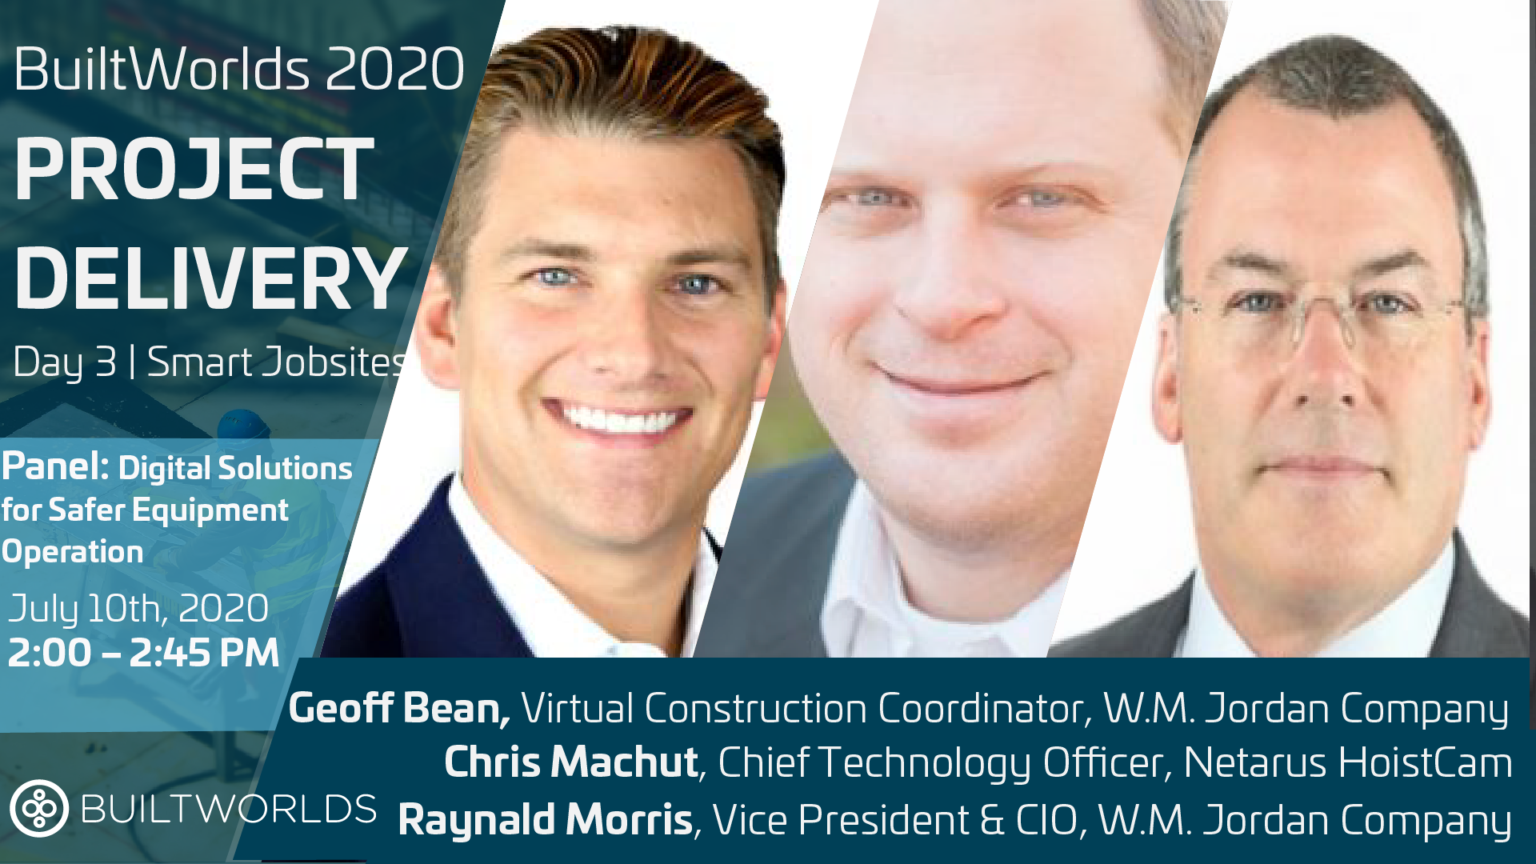 2022 Project Management Conference Technology for Better Construction